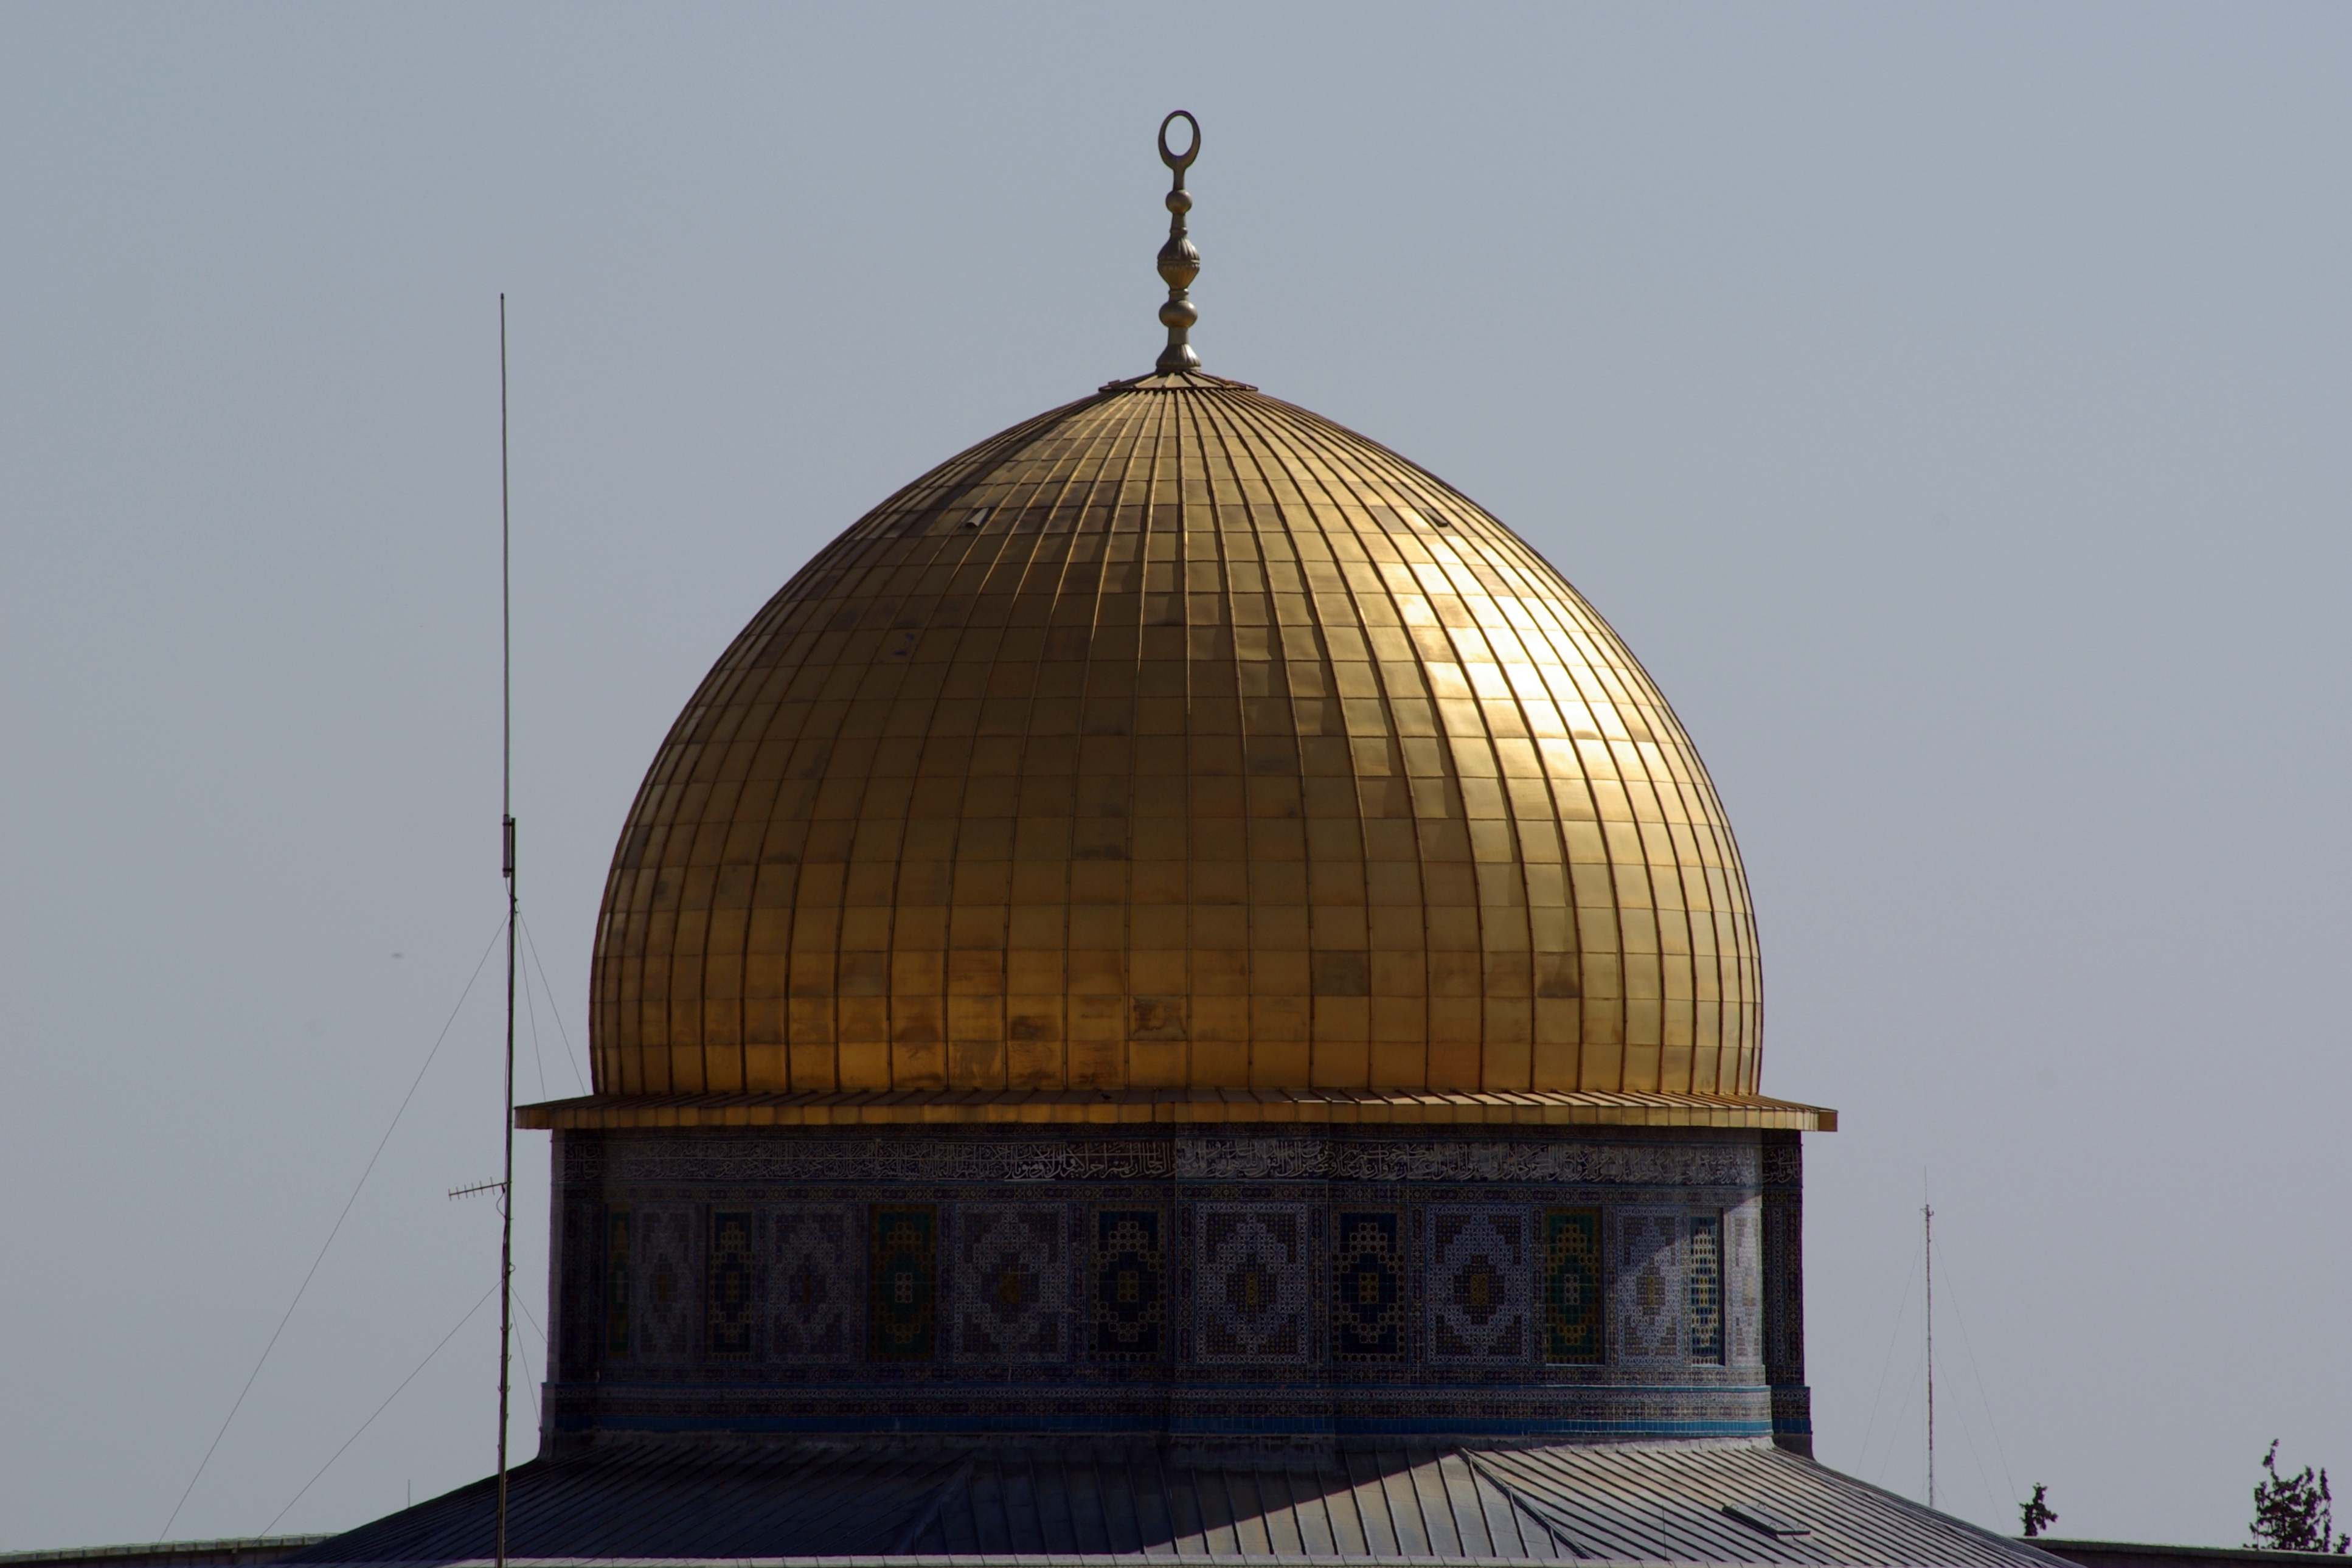 Dome of the Rock (8c.), Jerusalem: Architecture, History | The Red List